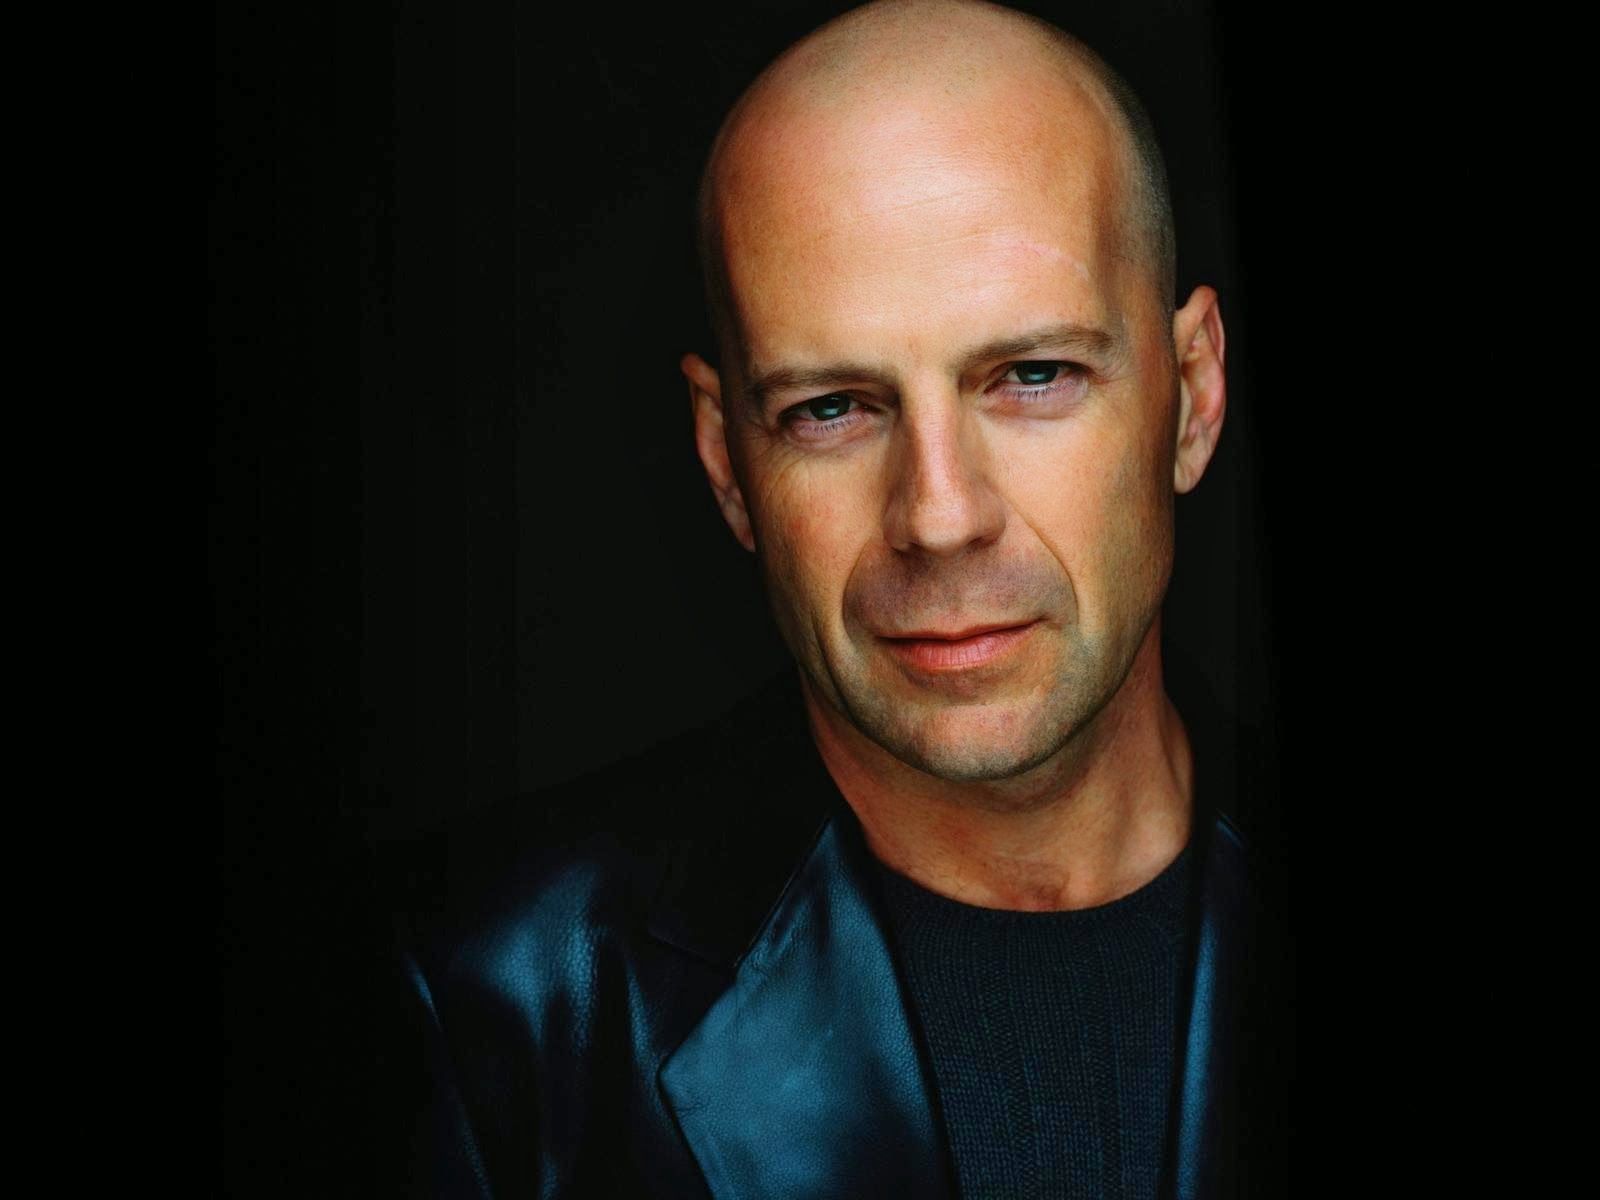 Bruce Willis   The King of Action movies Accolades   Actors and